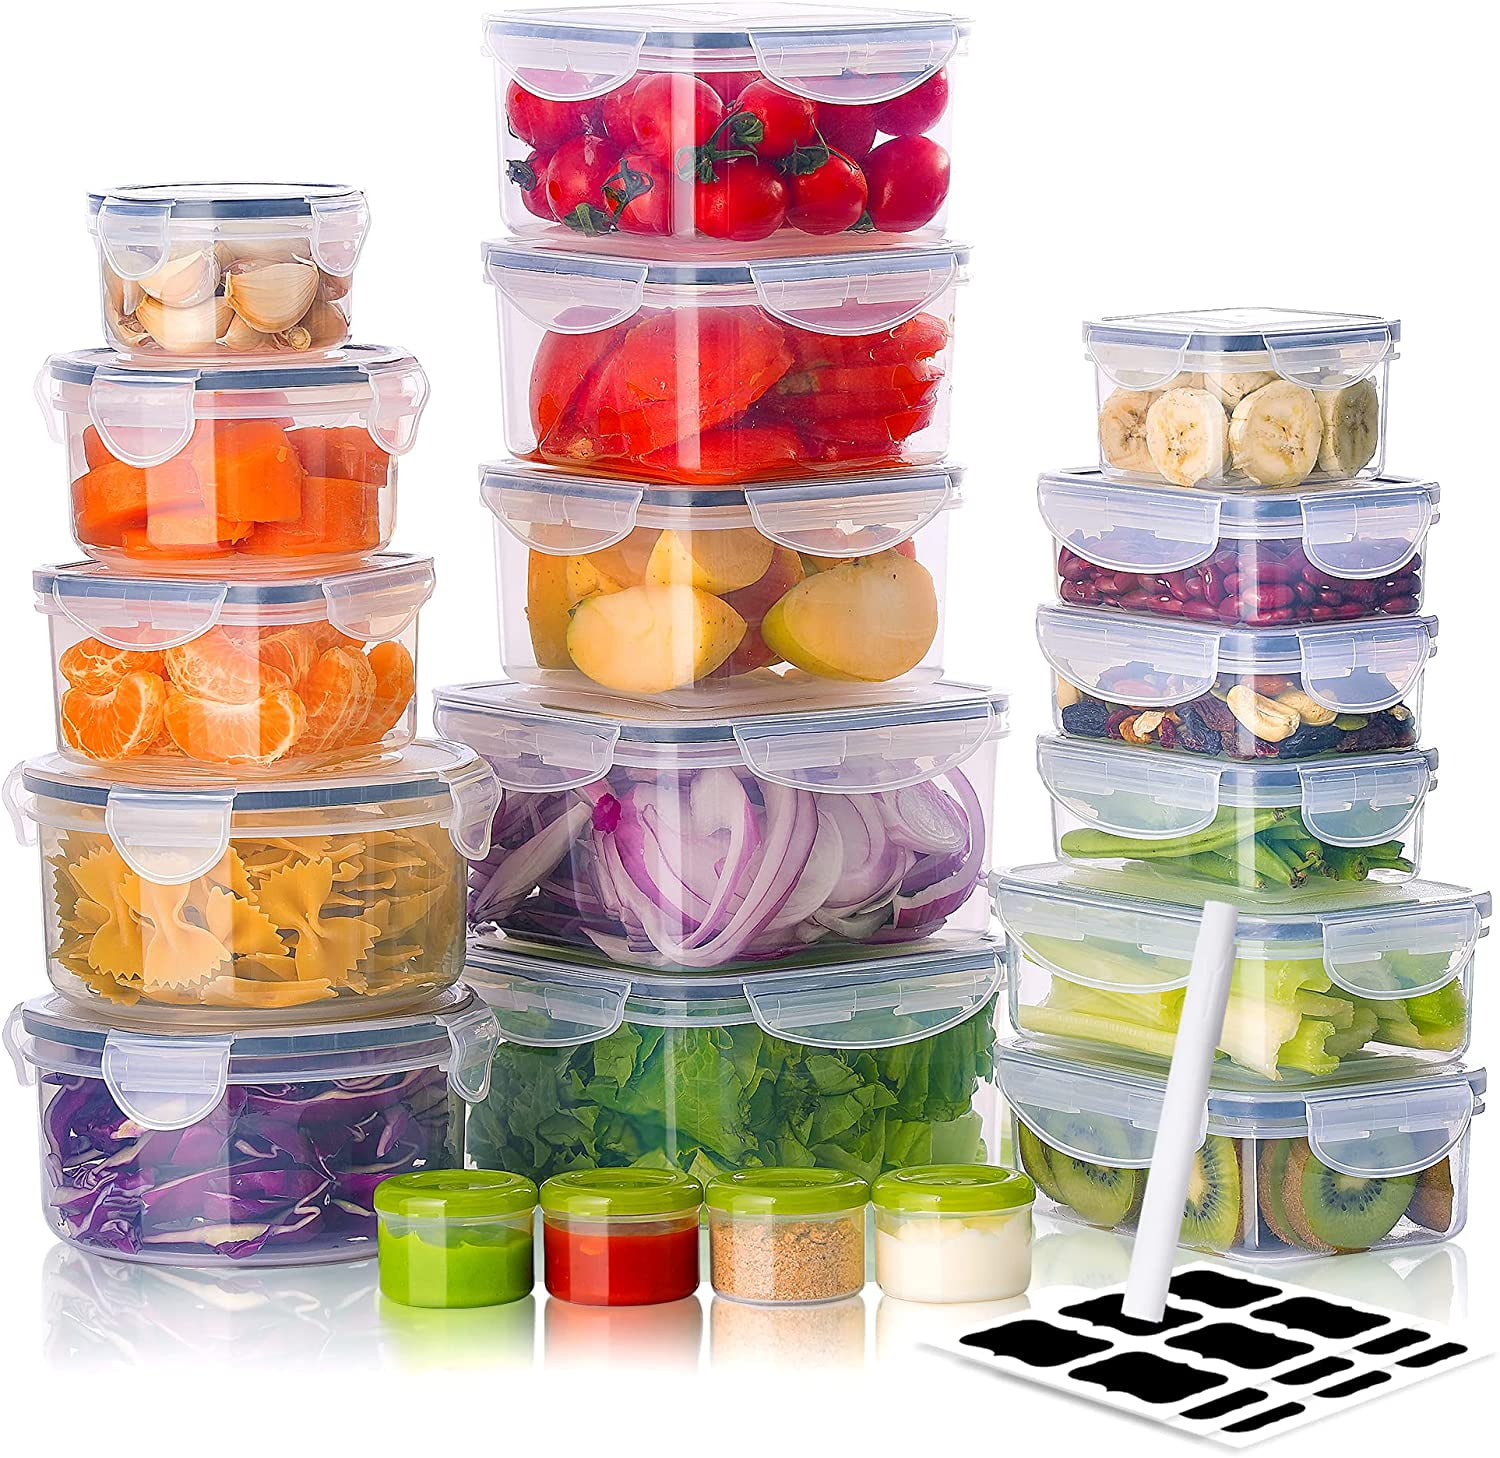 Durable Meal Prep Plastic Food Containers with Snap Lock Lids by Lexi Home  - 32-pc Set, Red - Lexi Home